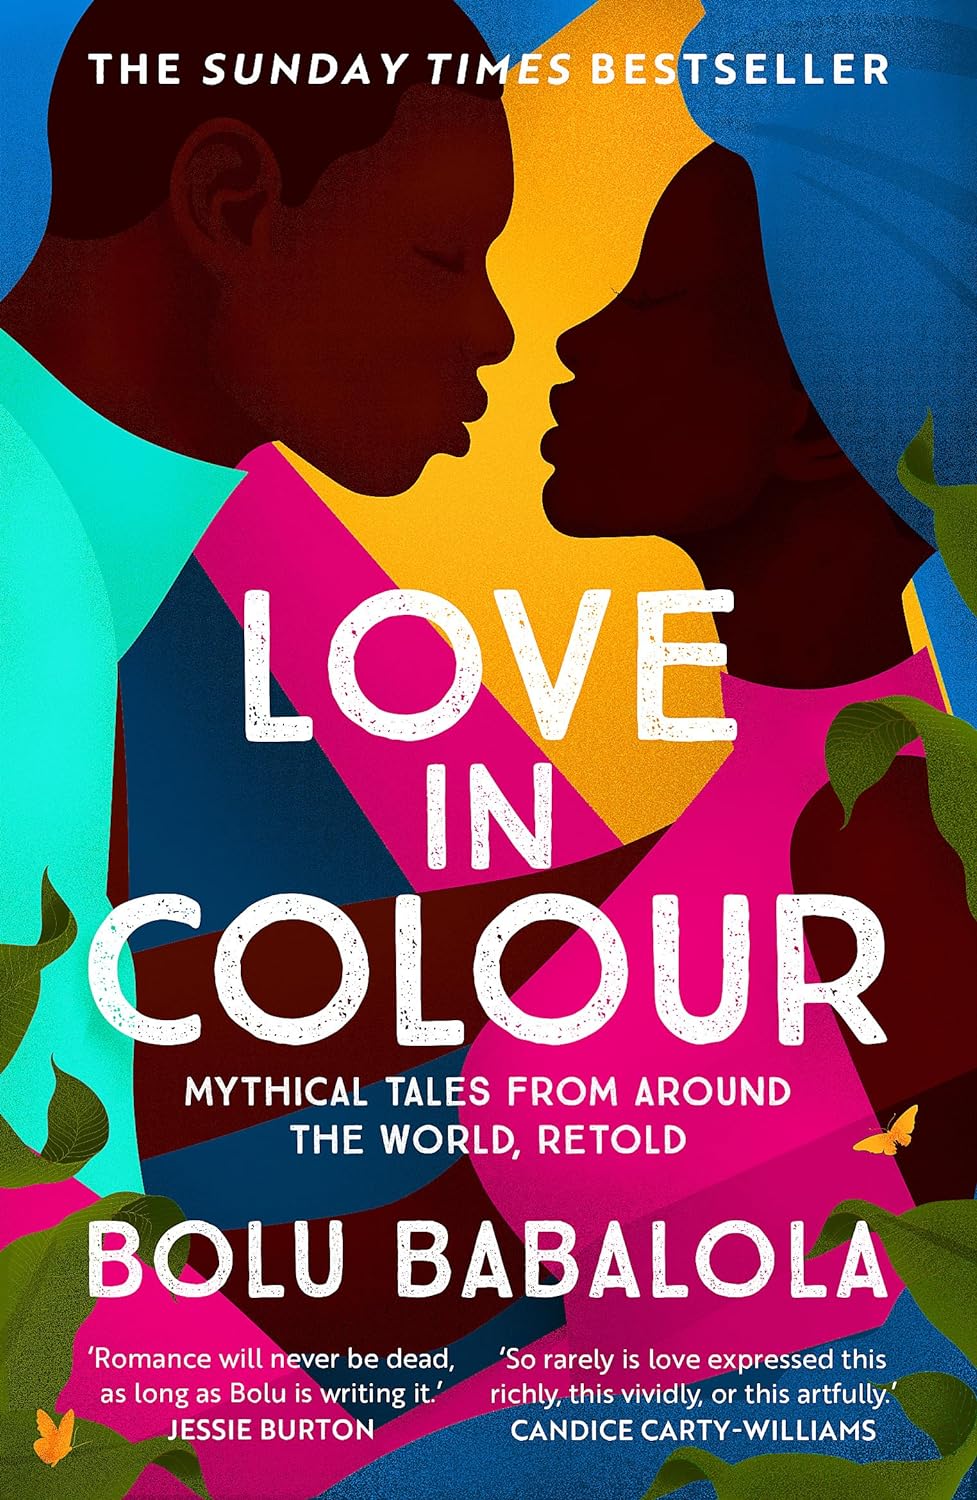 Book cover of 'Love in Colour' by Bolu Babalola